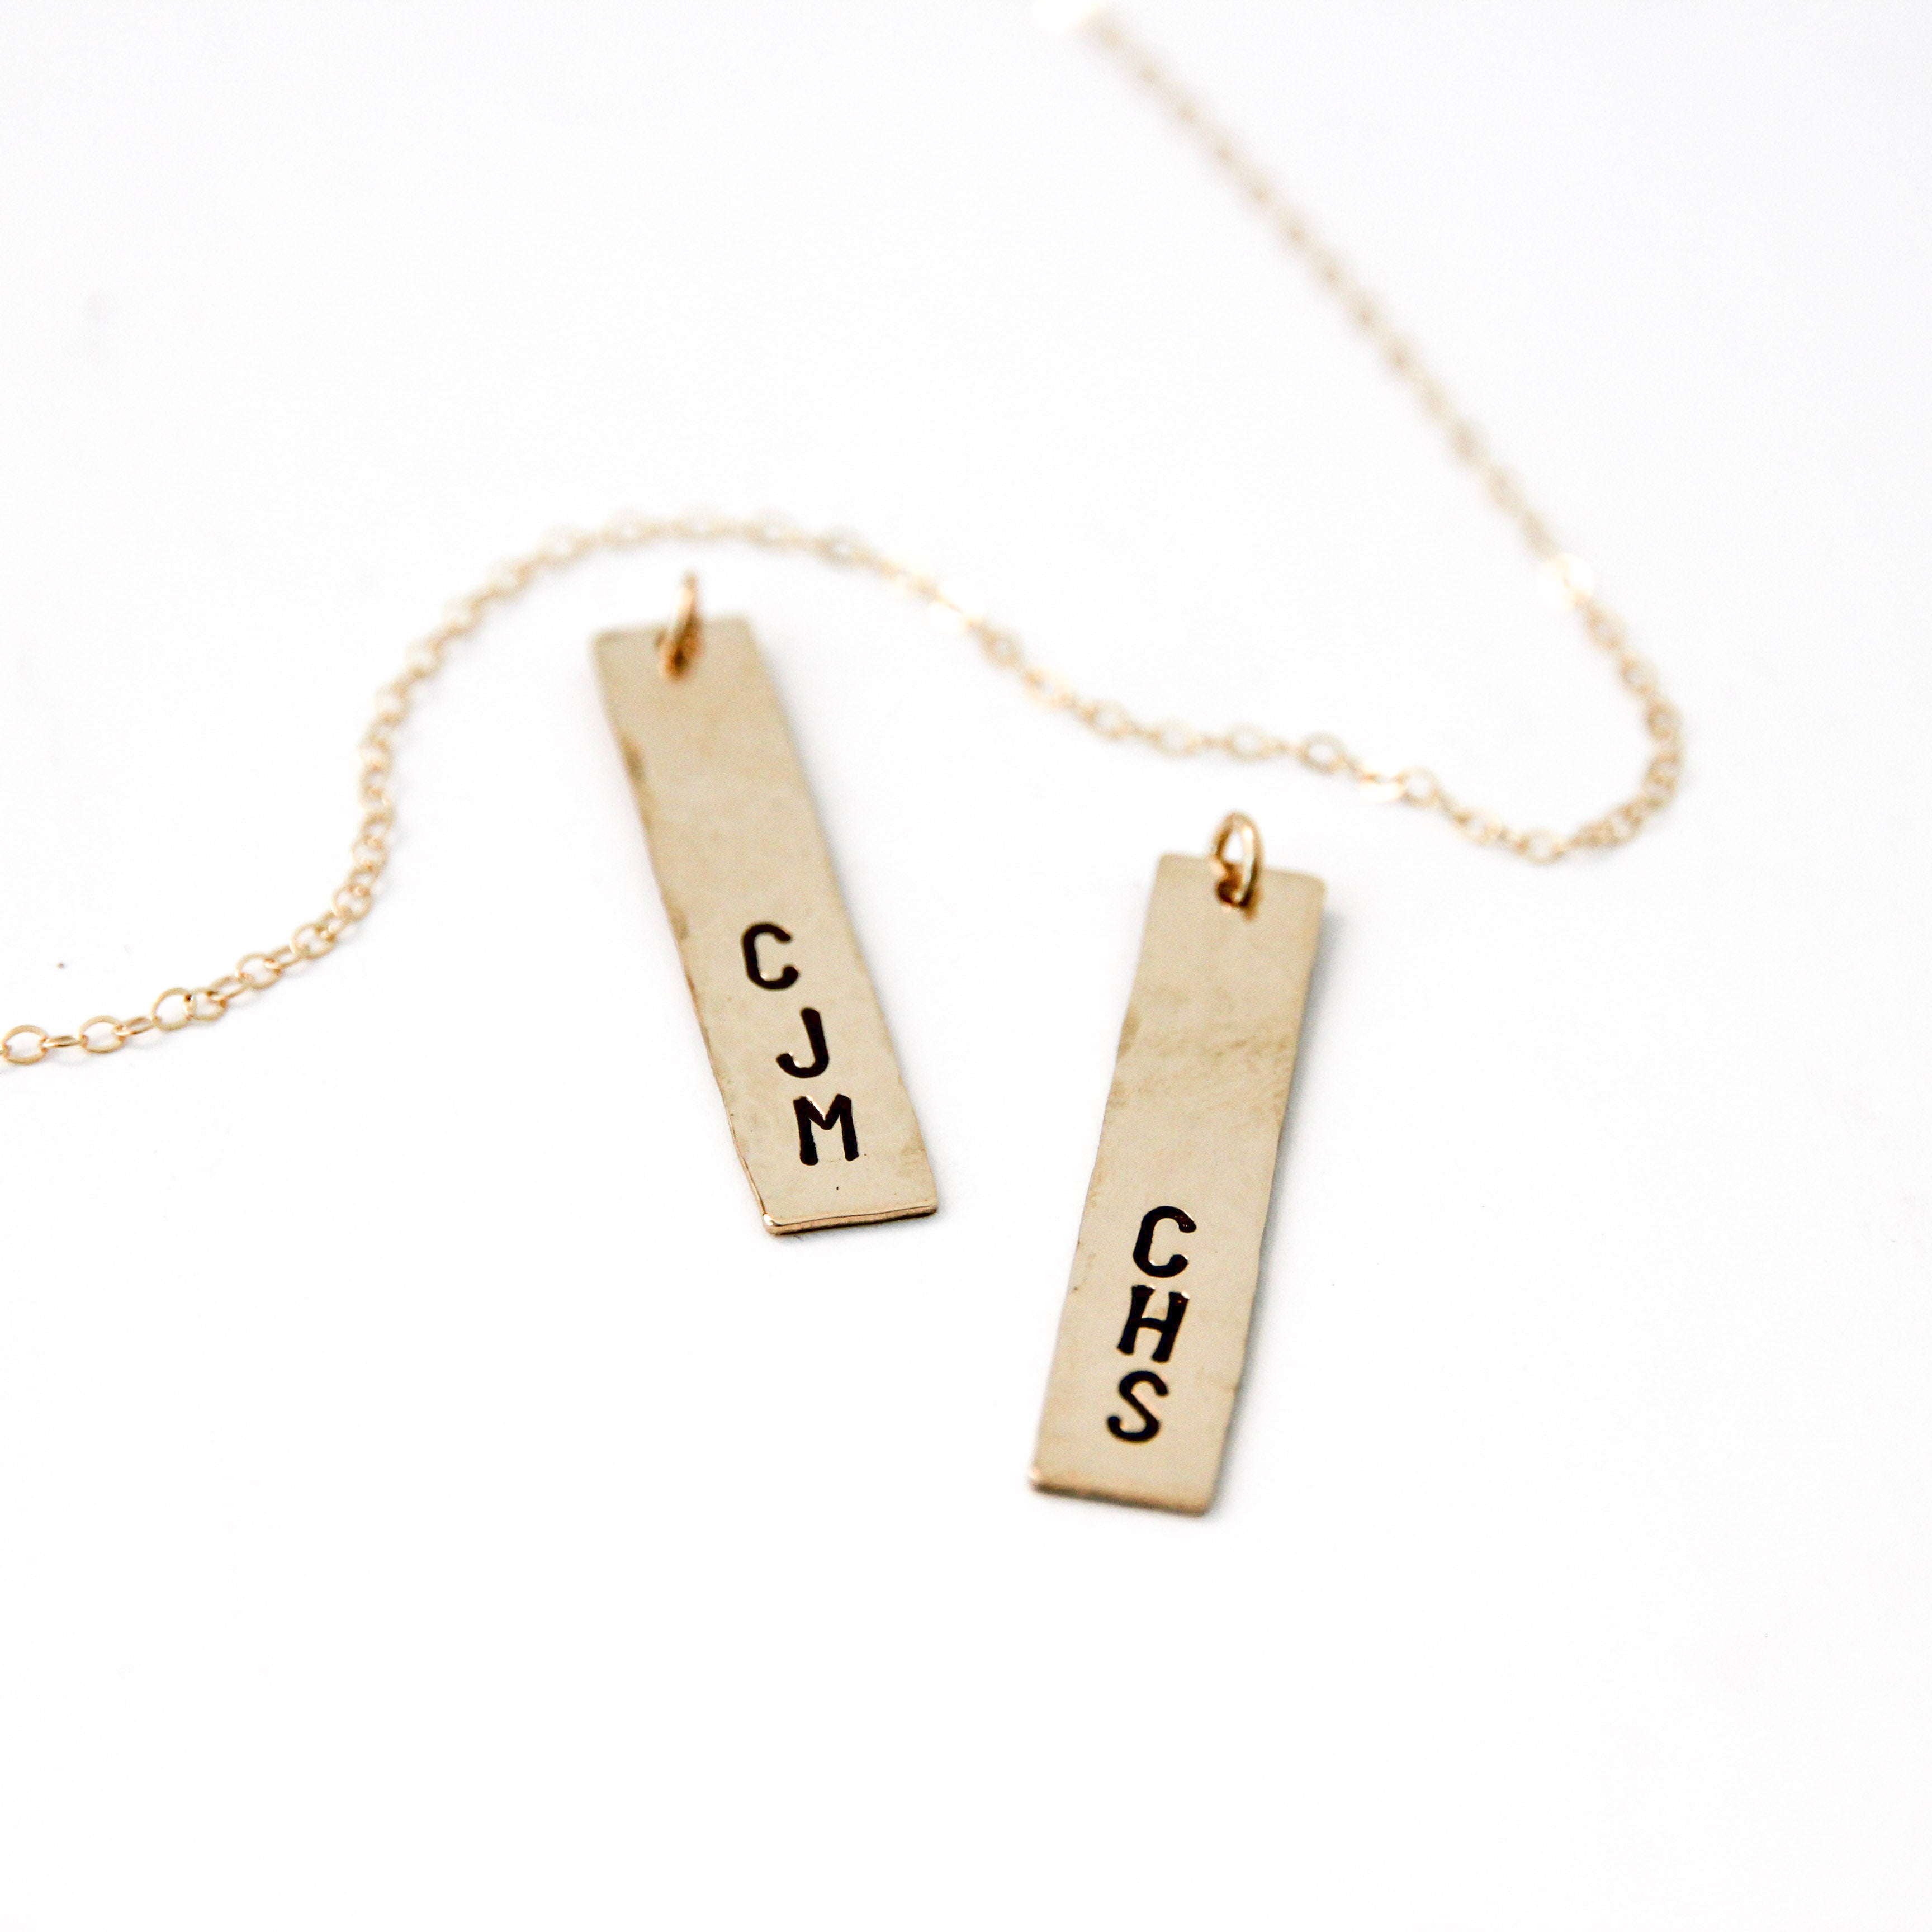 Additional Hand-Stamped Vertical Bar Charm